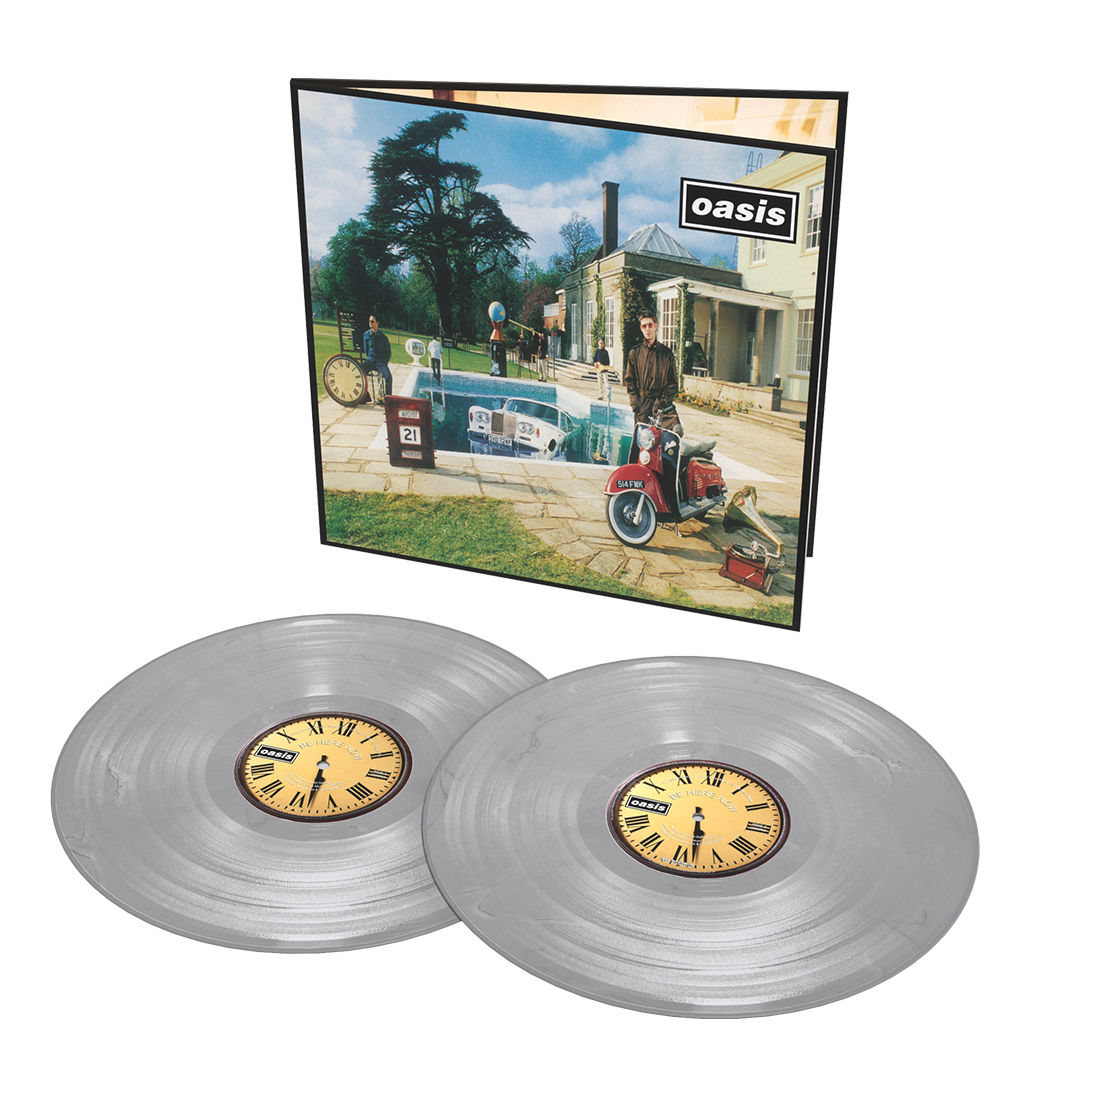 CDJapan : Be Here Now (Remastered) [Limited Edition] [2LP / Import Disc]  Oasis Vinyl (LP)